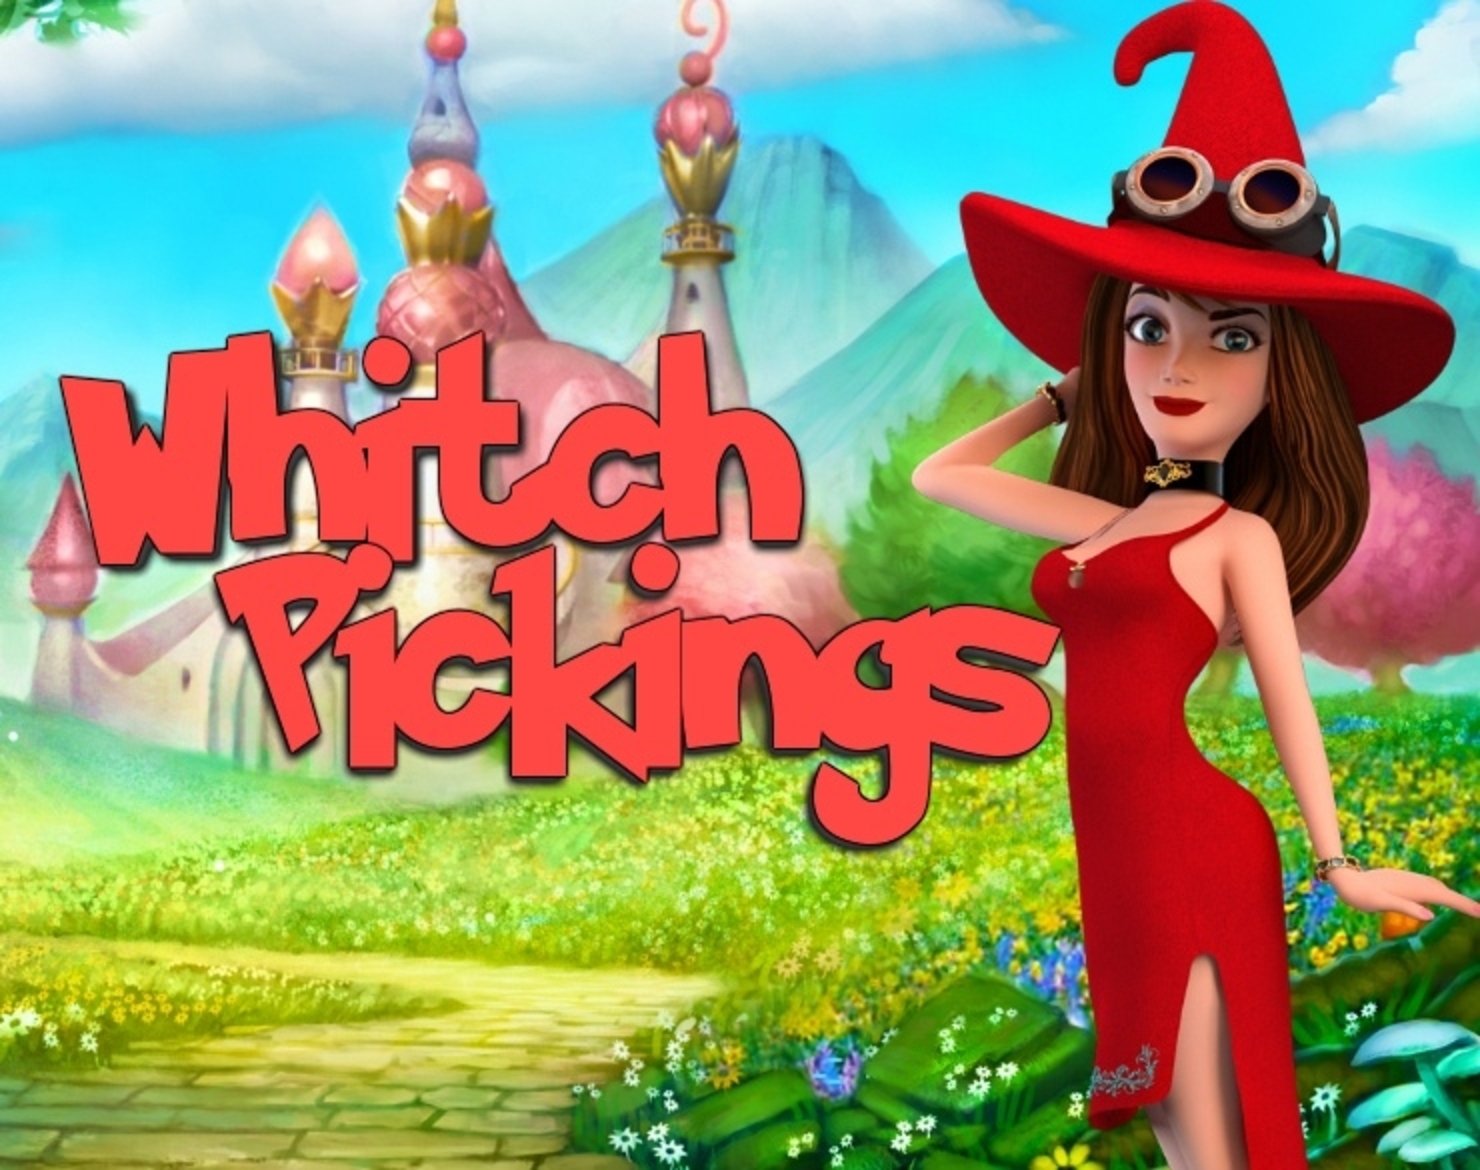 The Witch Pickings Online Slot Demo Game by NextGen Gaming